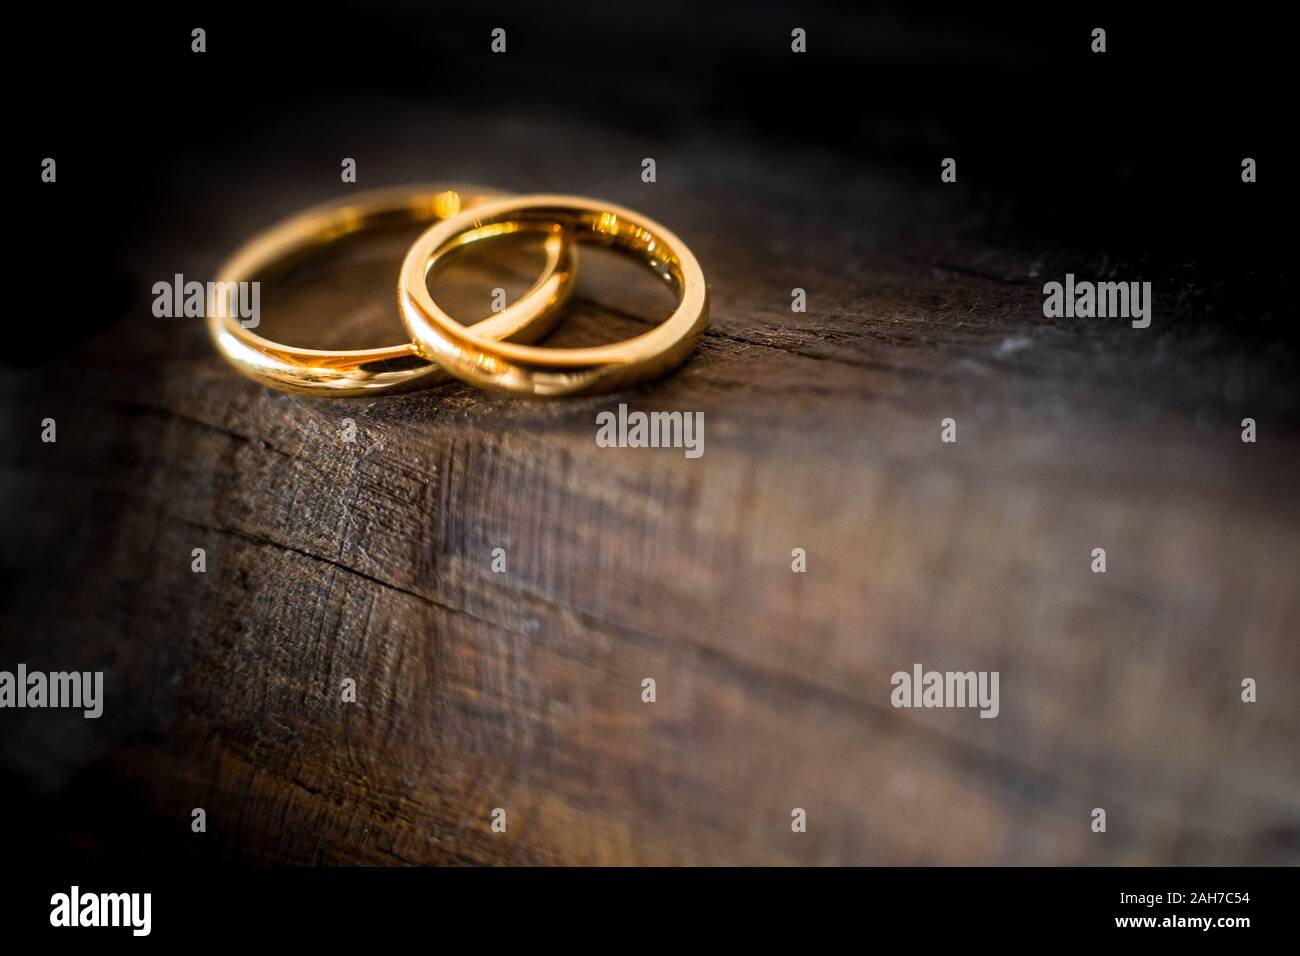 Close up of two golden wedding rings lying on the edge of an ancient and weathered wooden table Stock Photo